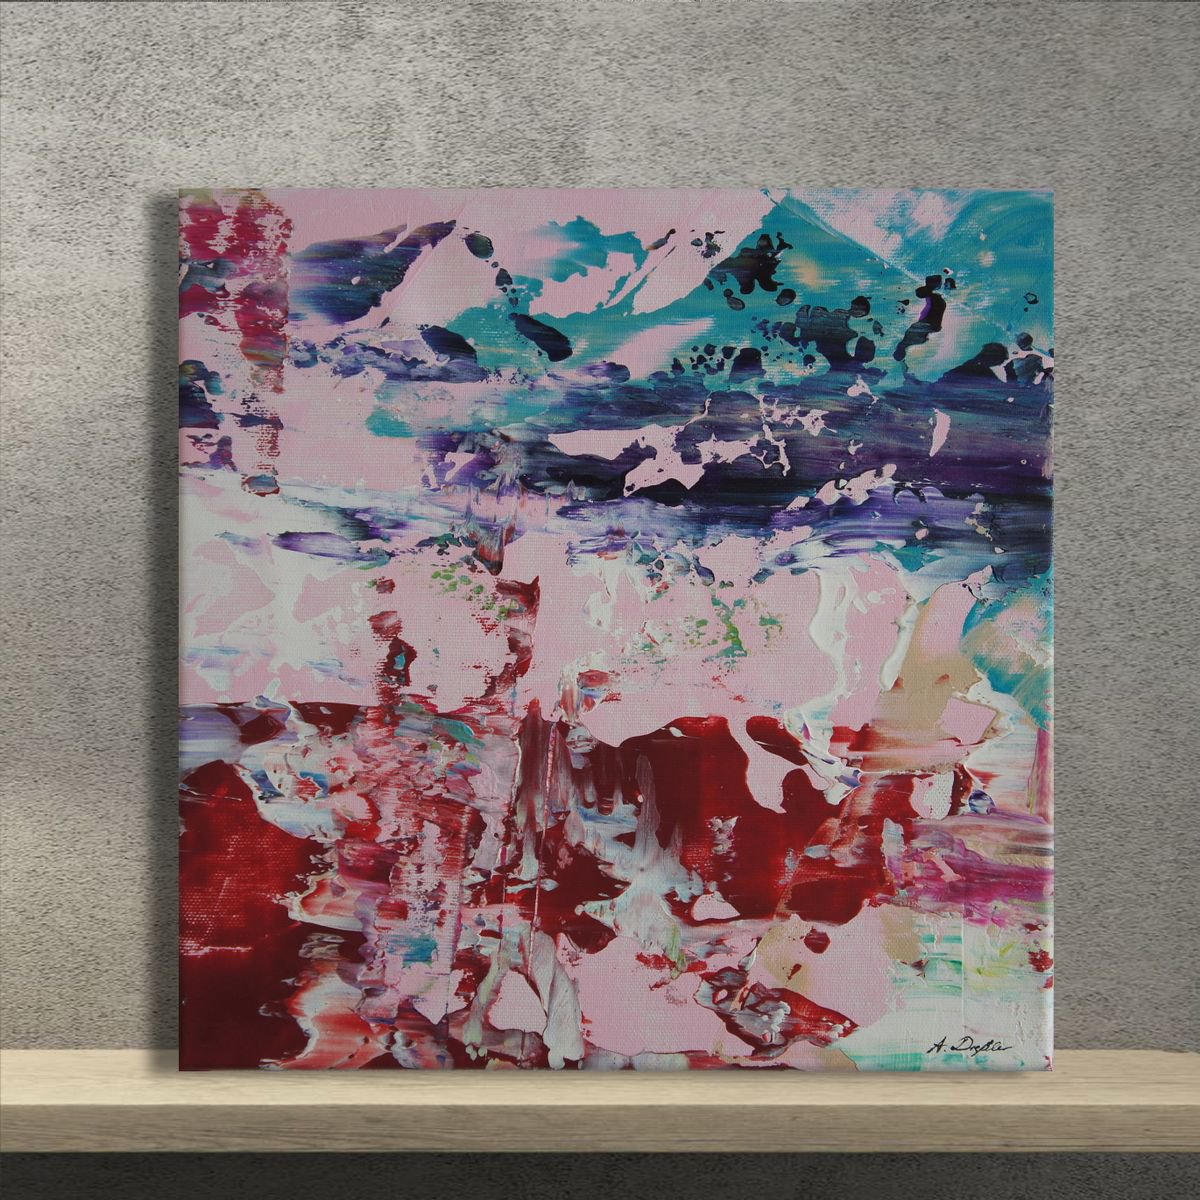 A Square Foot On The Richter Scale V (30 x 30 cm) (12 x 12 inches) by Ansgar Dressler